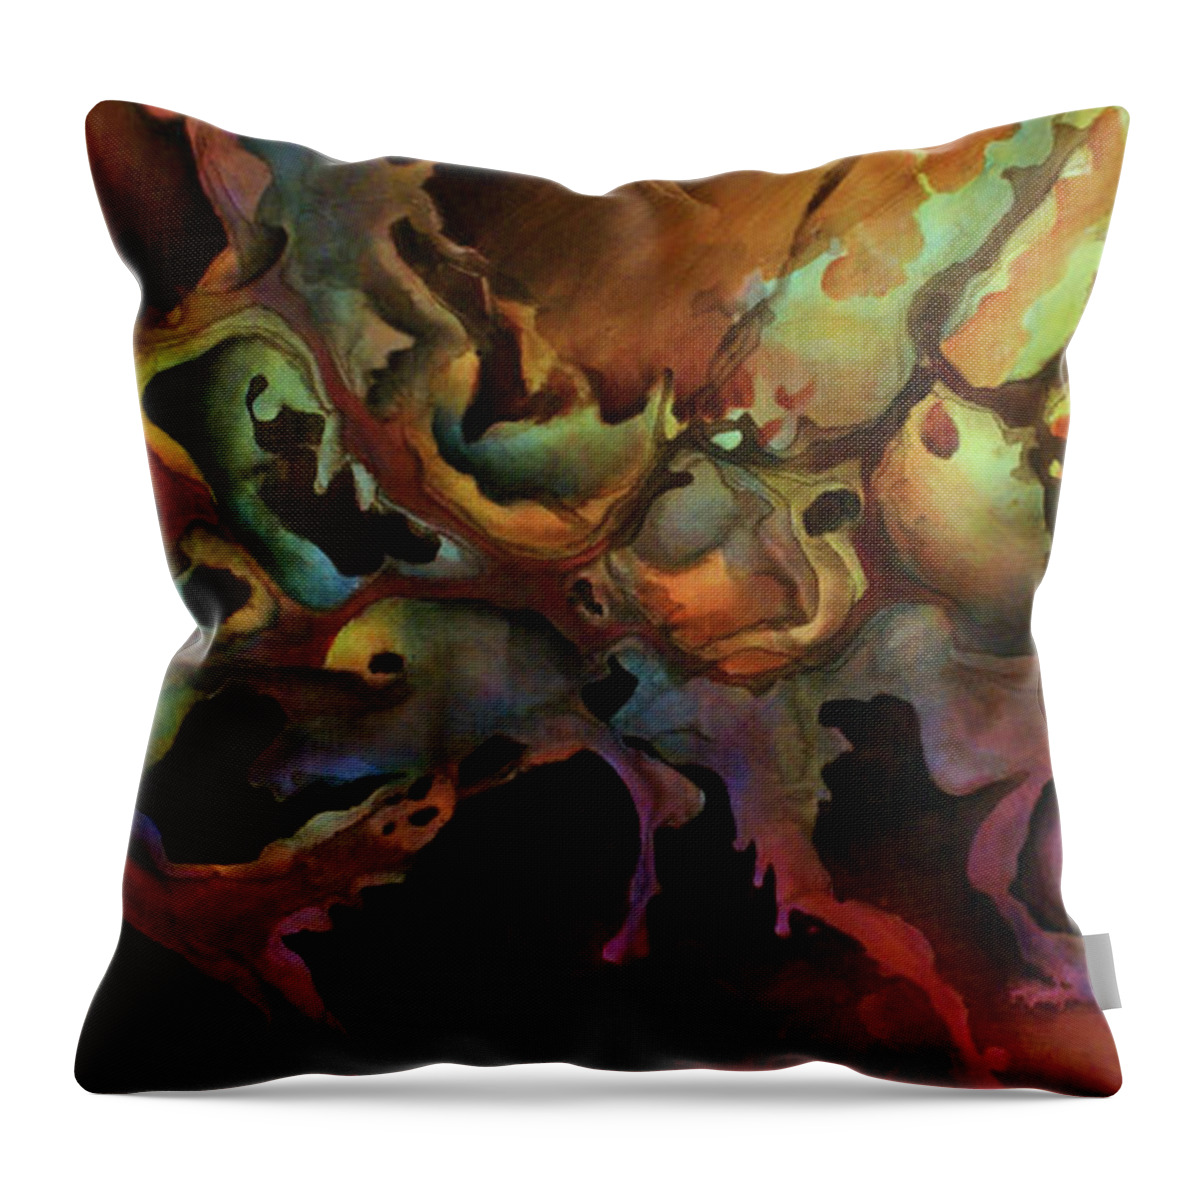 Abstract Design Throw Pillow featuring the painting Abstract design 104 by Michael Lang